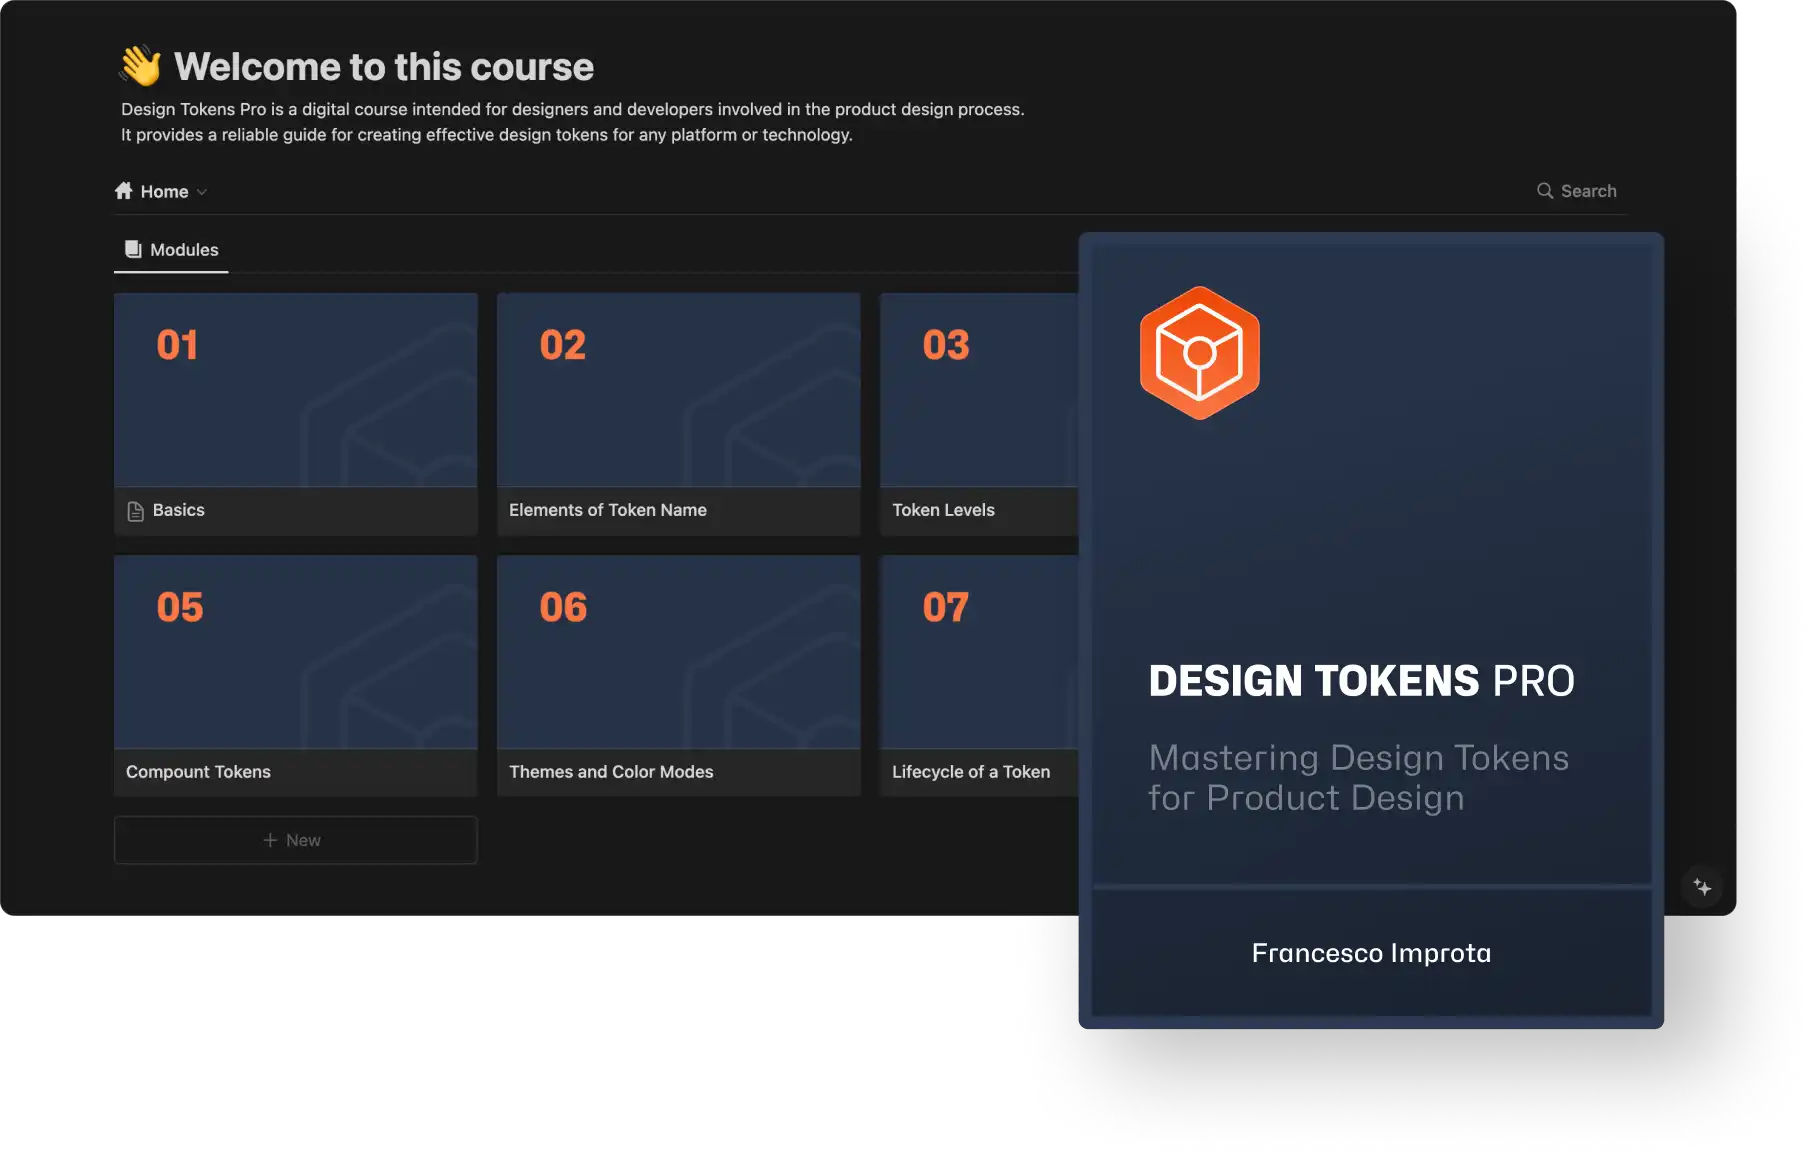 A preview of the digital course on design tokens, showing course modules